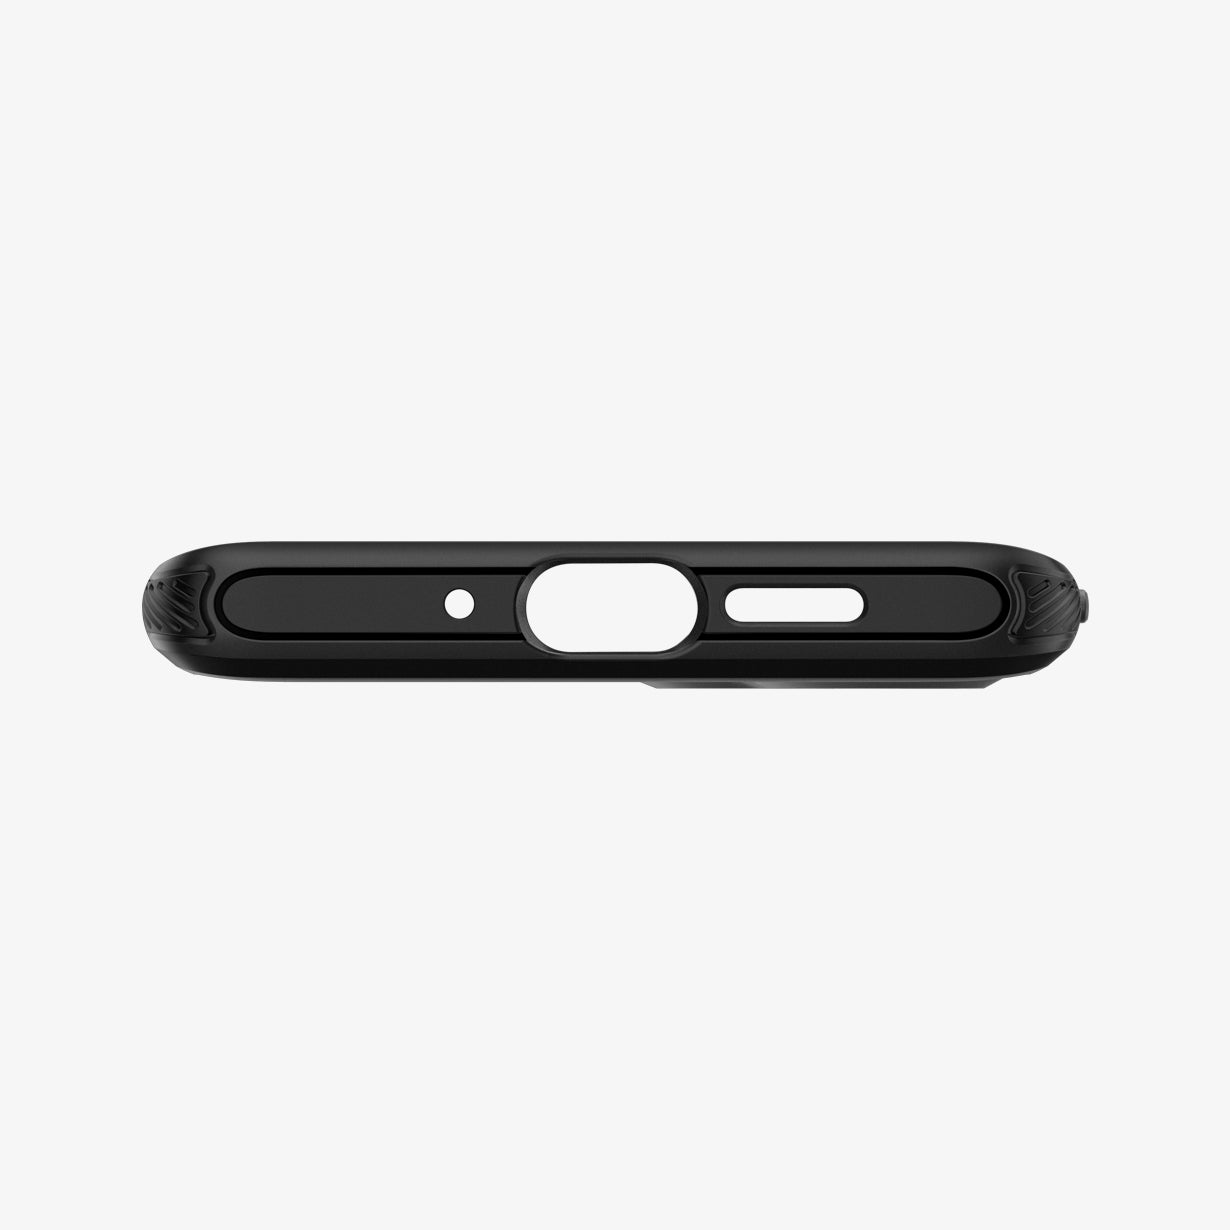 L37CS25725 - Huawei P30 Pro Case Rugged Armor in black showing the bottom